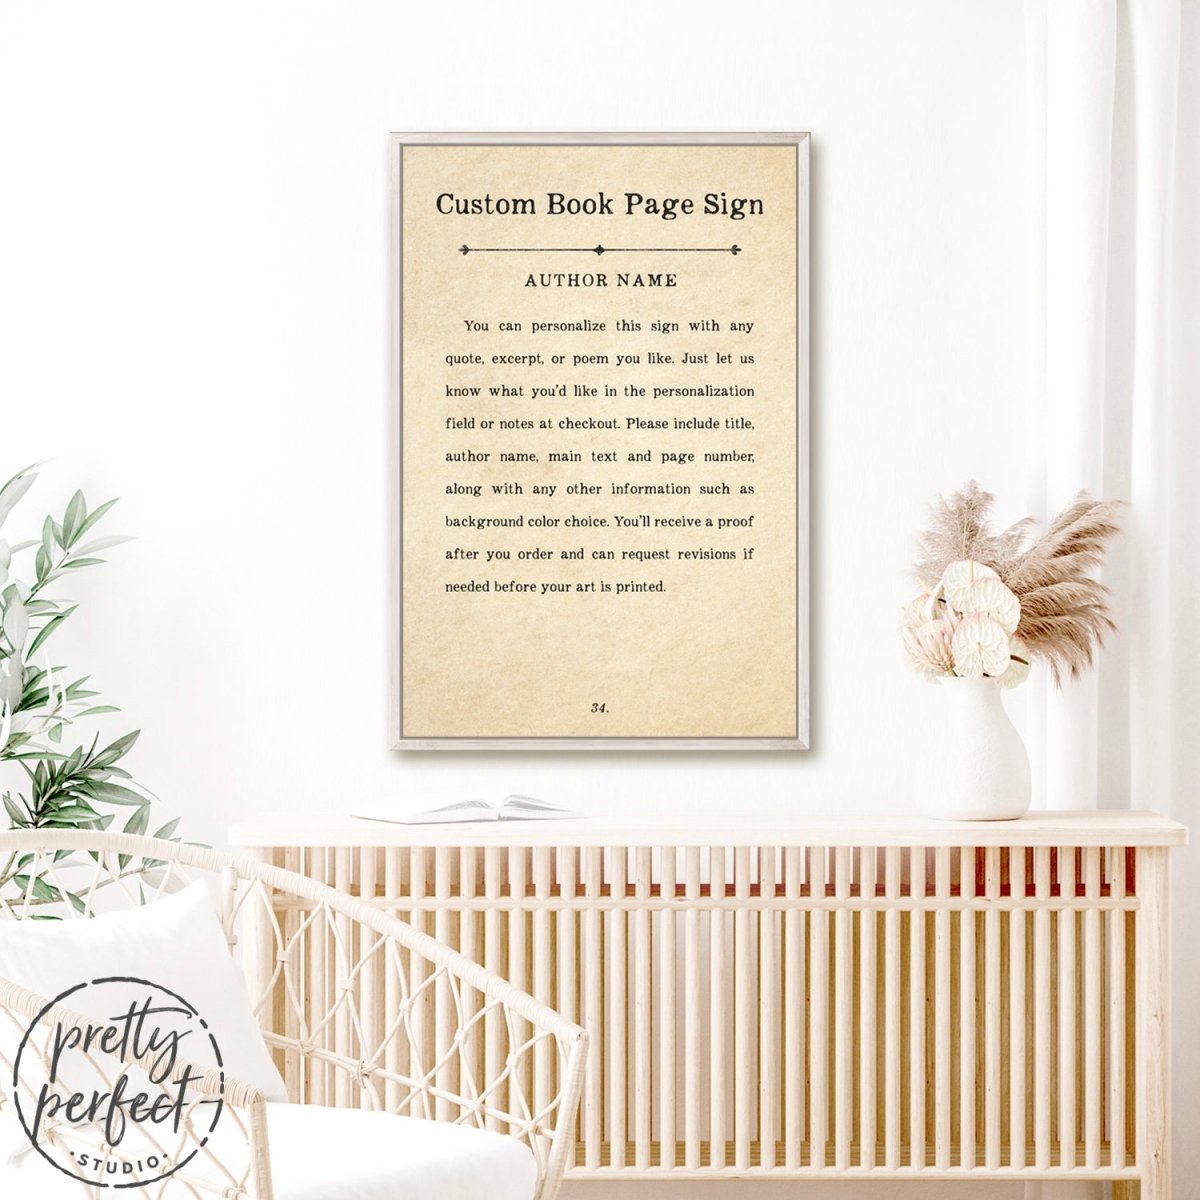 Custom Book Page Sign Above the Table - Pretty Perfect Studio